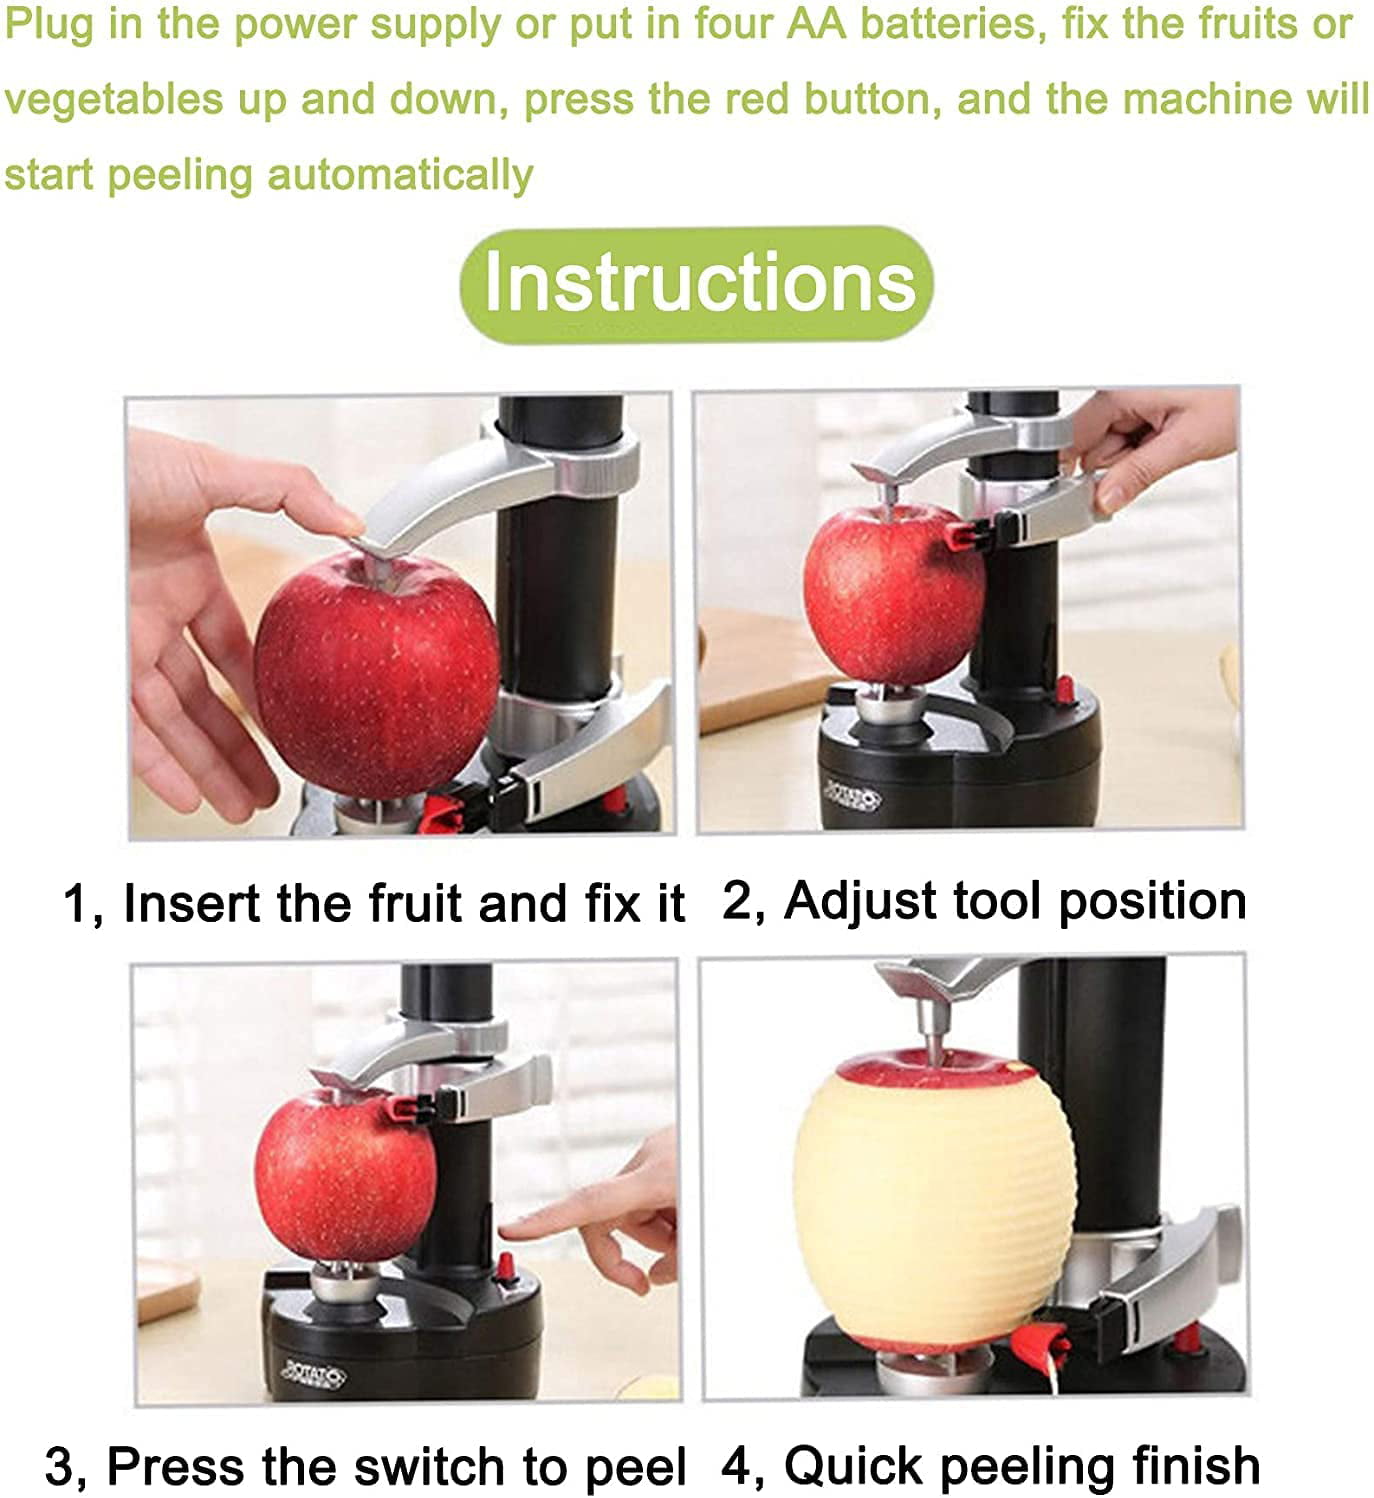 Rapid Peeler - One Touch Electric Action - Black